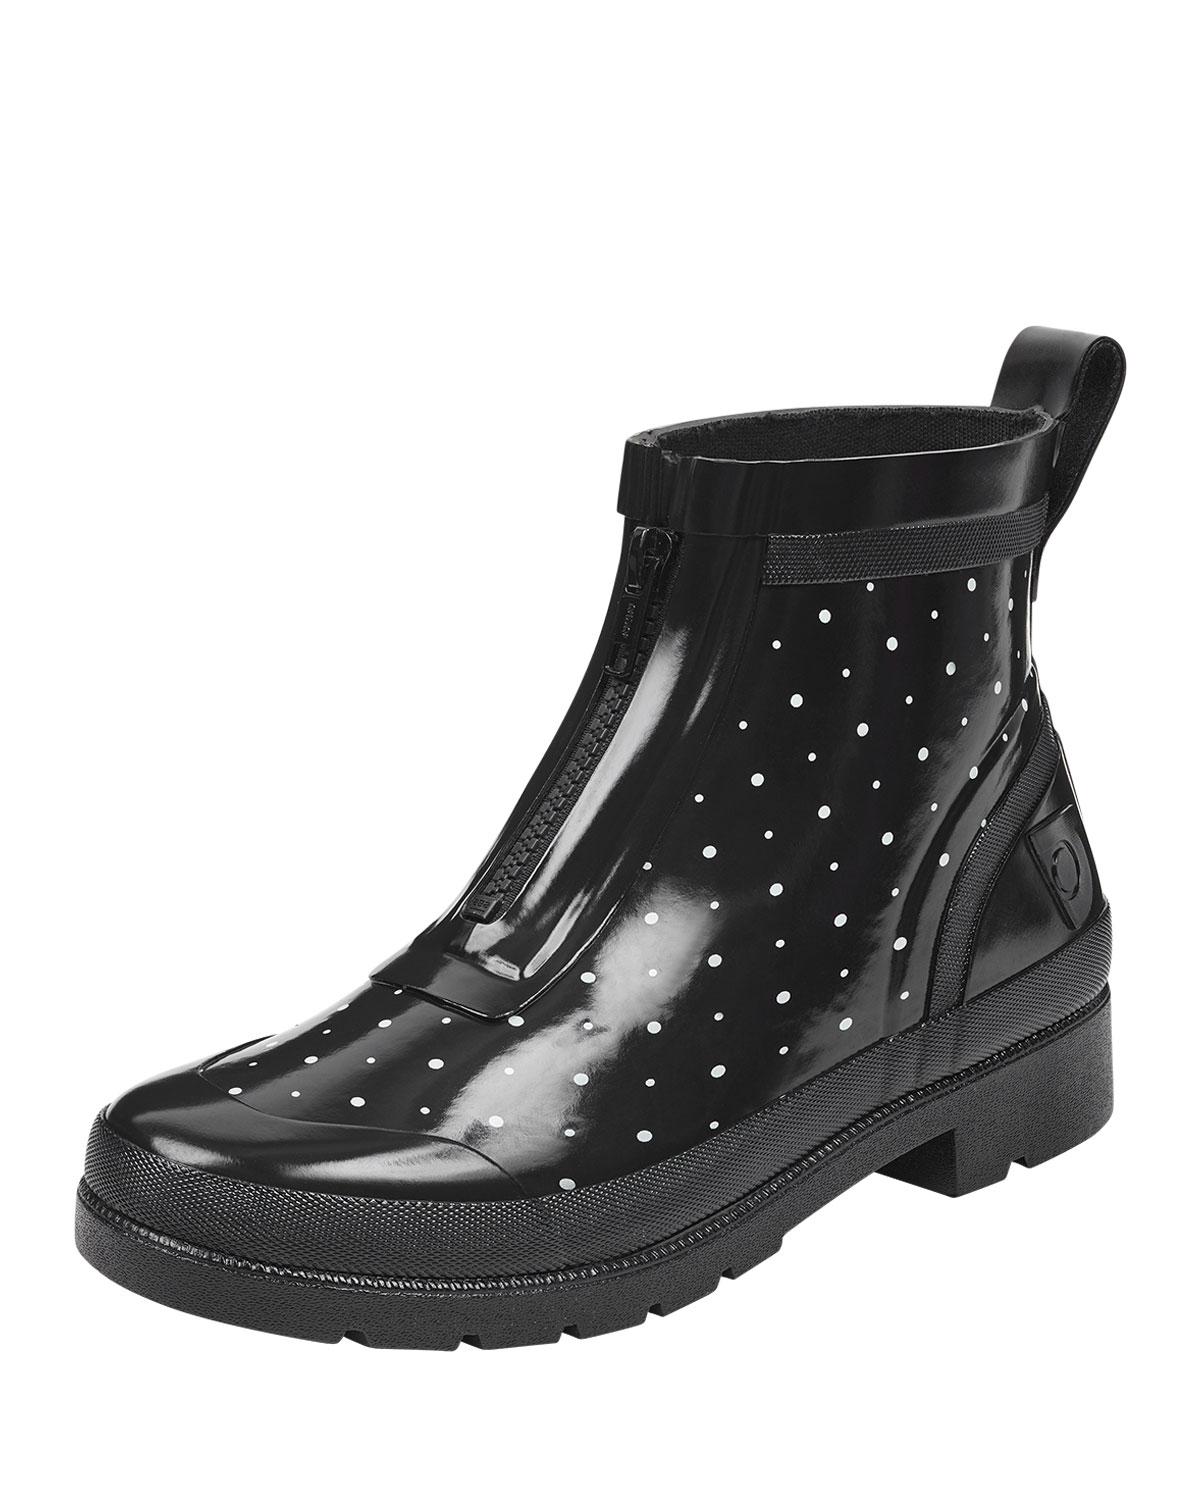 Lyst - Tretorn Lina Zip Dotted Rubber Rain Boots in Black